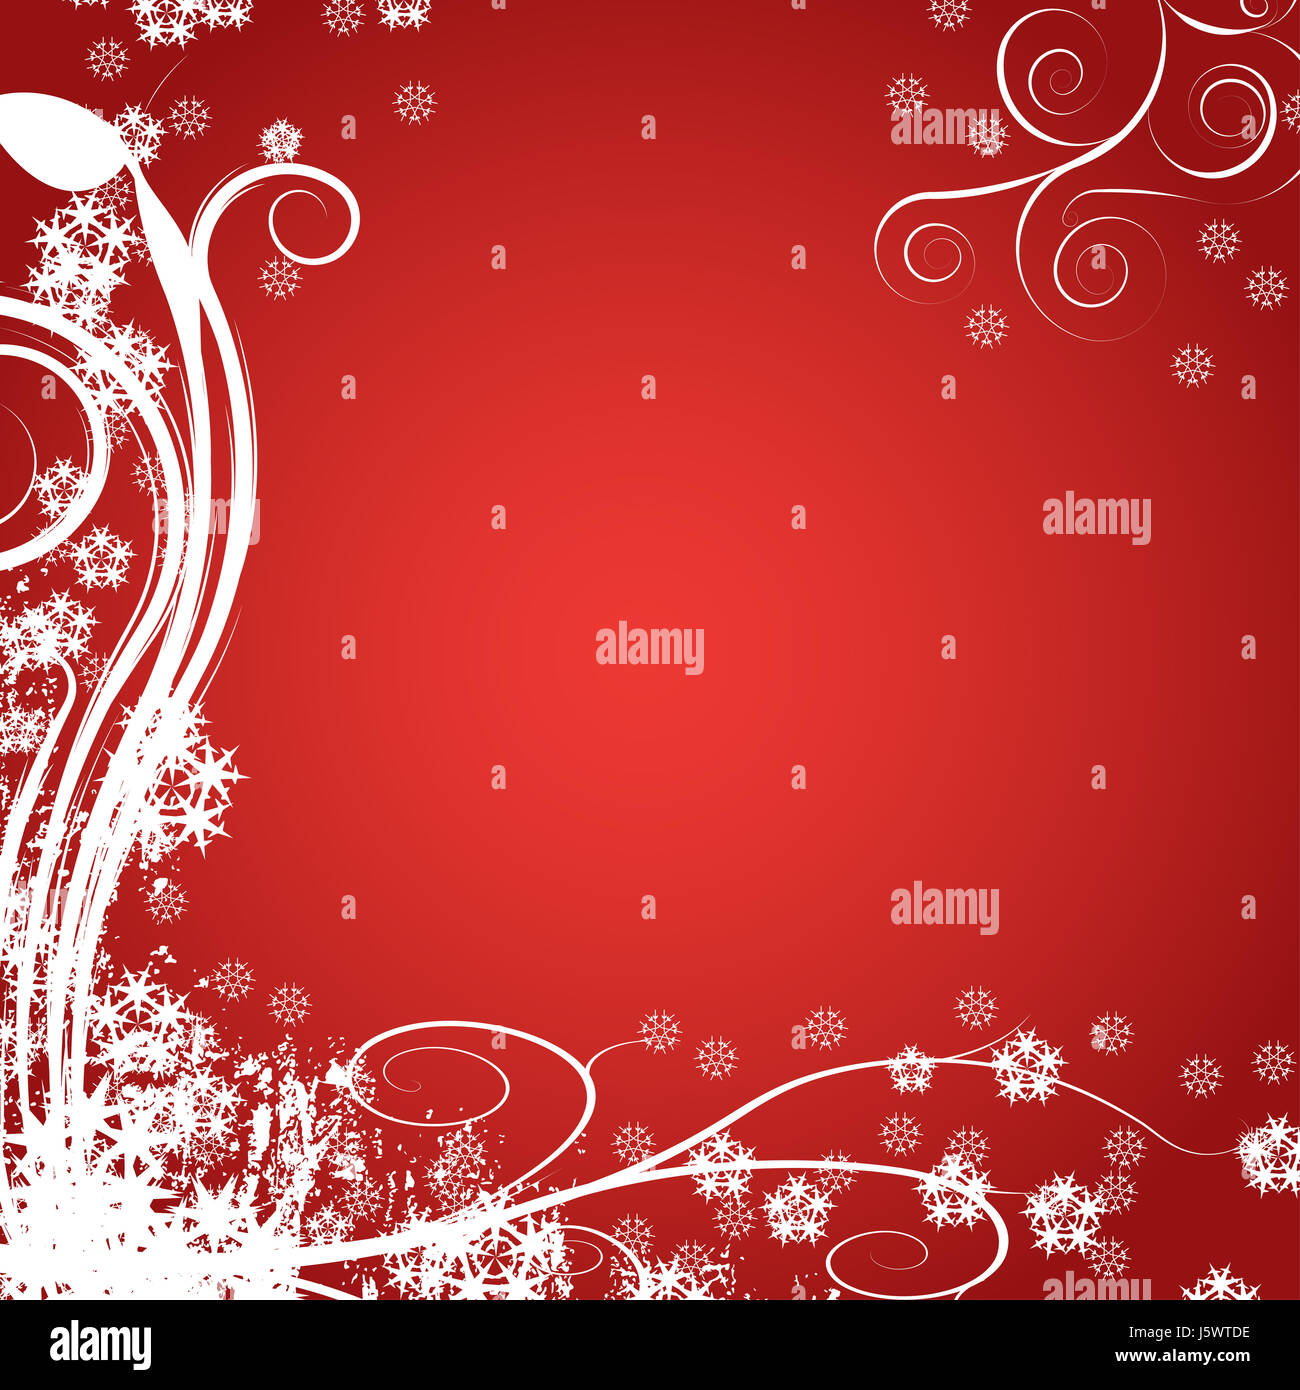 winter flower plant ice illustration vector snow backdrop background red art Stock Photo